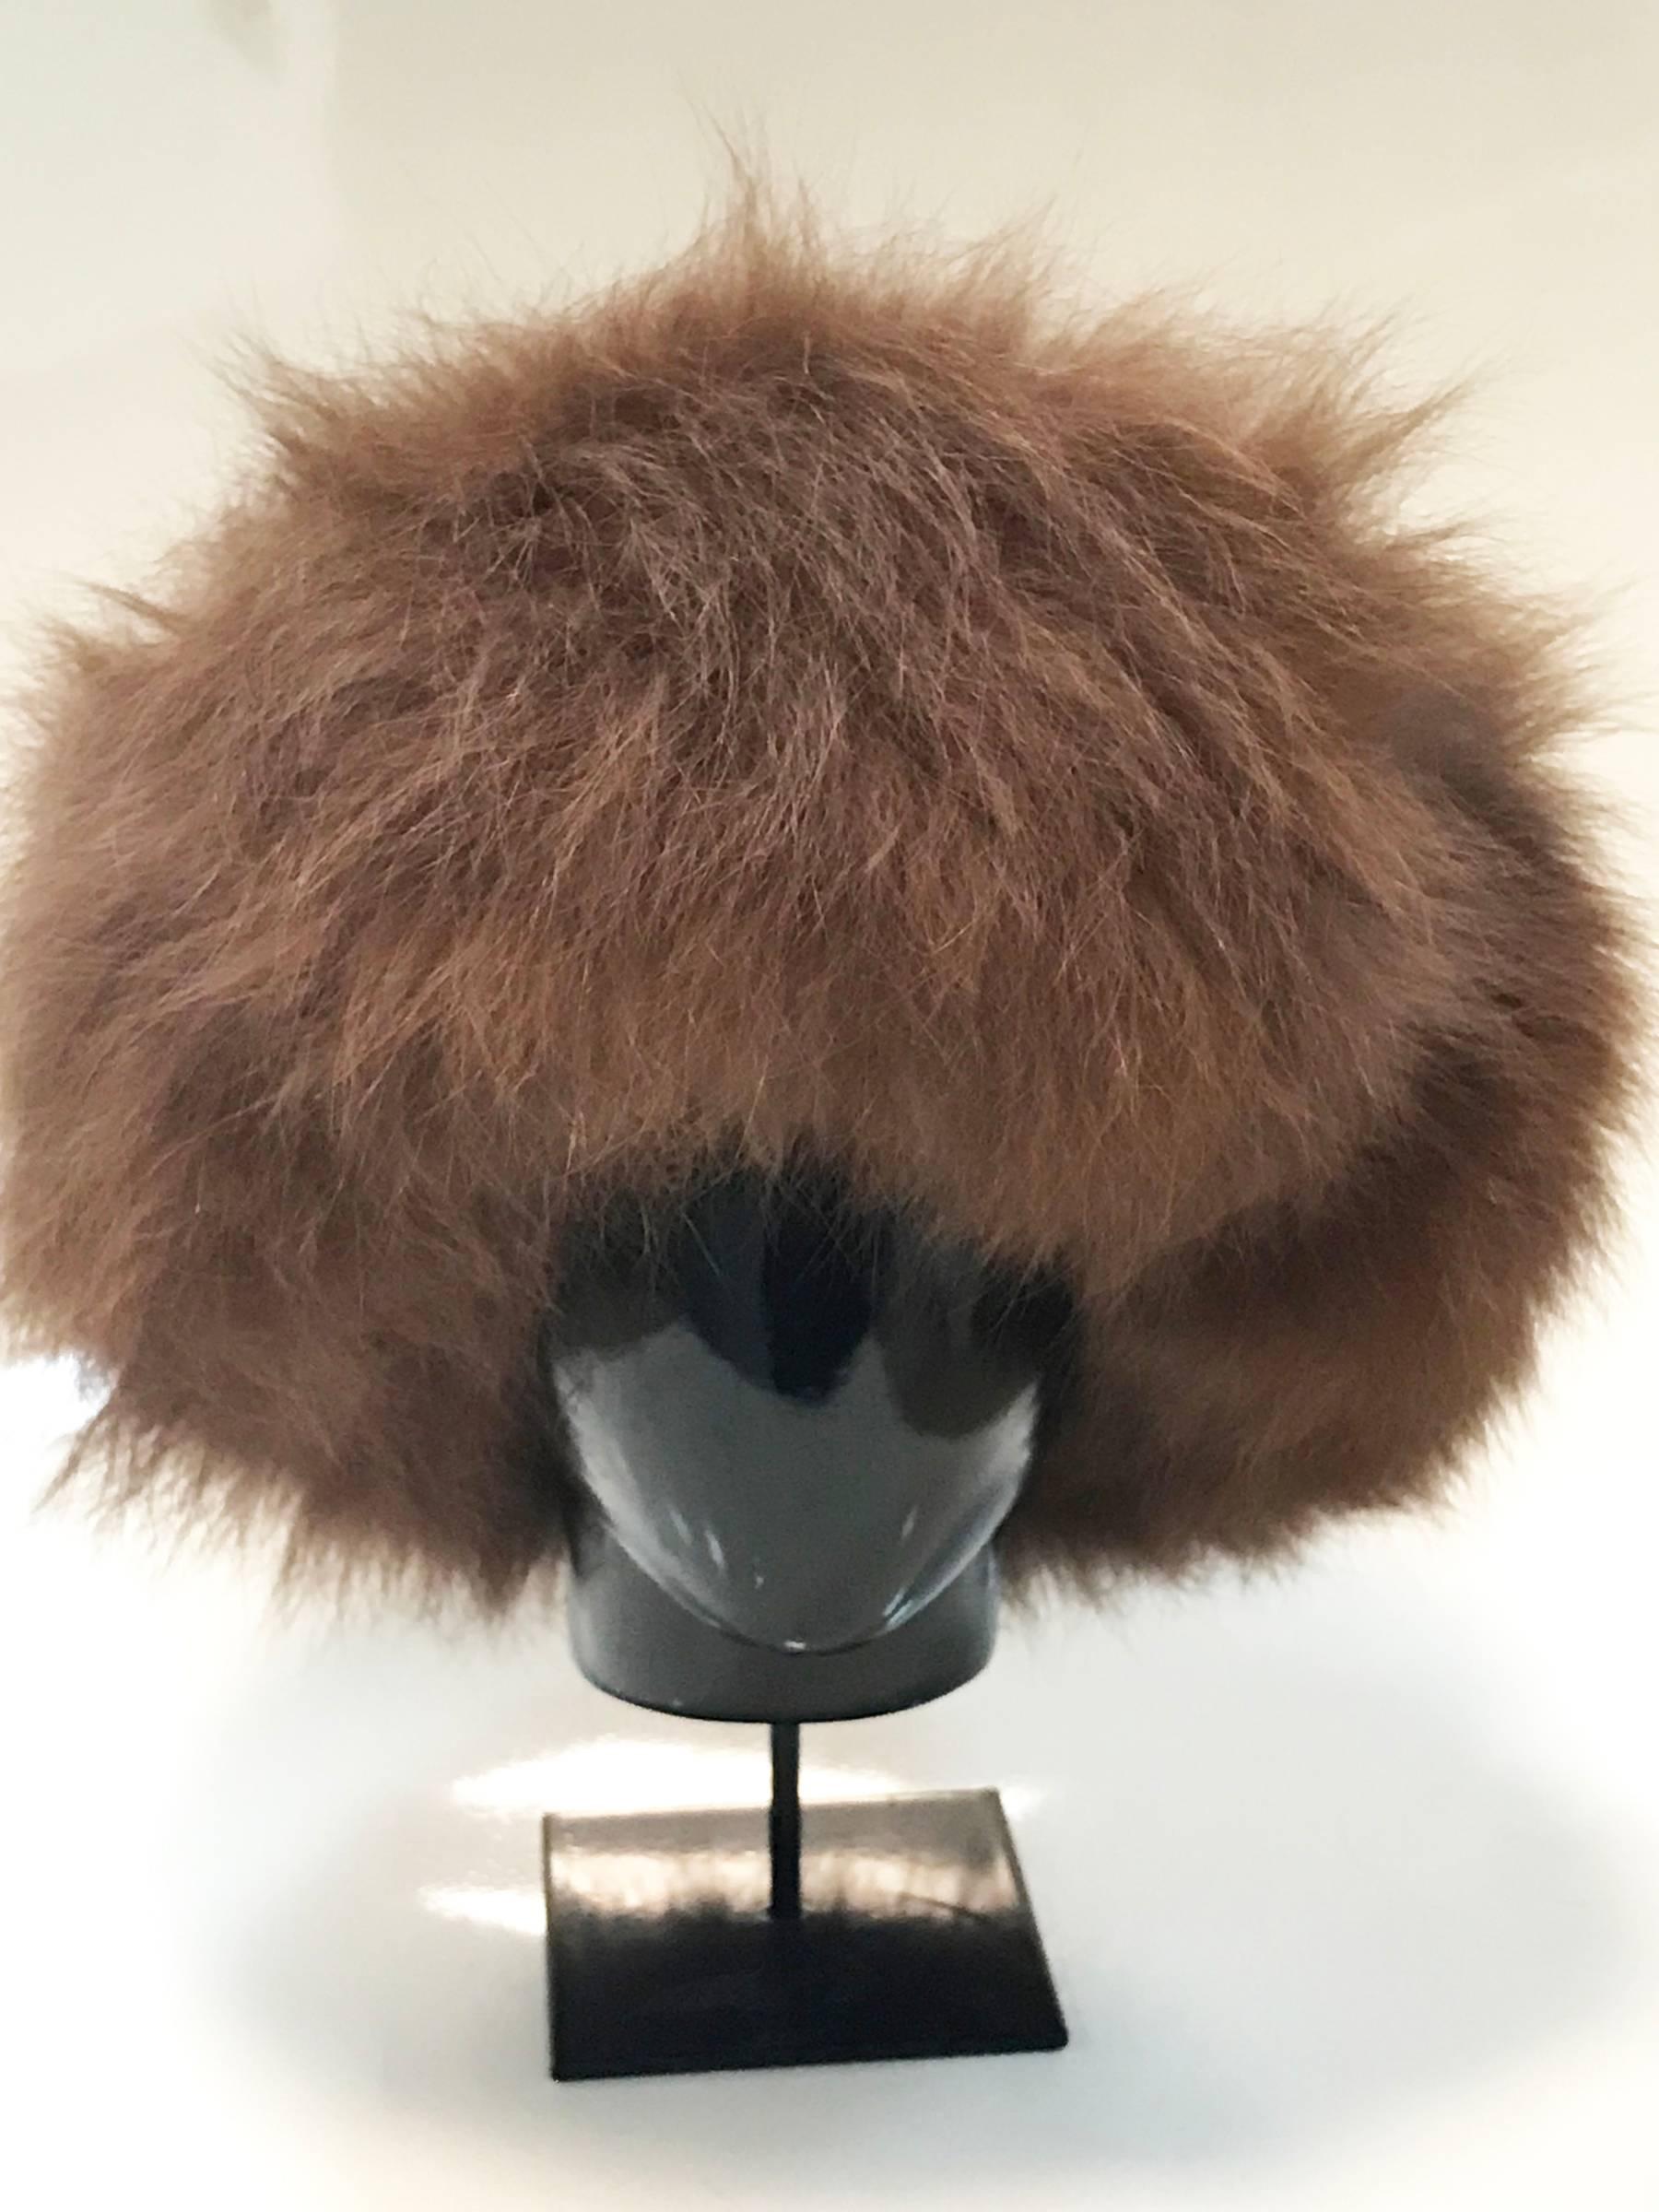 100% multicolour wool knitted hat with fox fur all around the edge of the hat.
This hat was designed in 1976 for the autumn-winter Russian Collection.
size could be 56 to 58.

Yves Saint Laurent, cited in Vogue, September 1976.

    ‘What is your